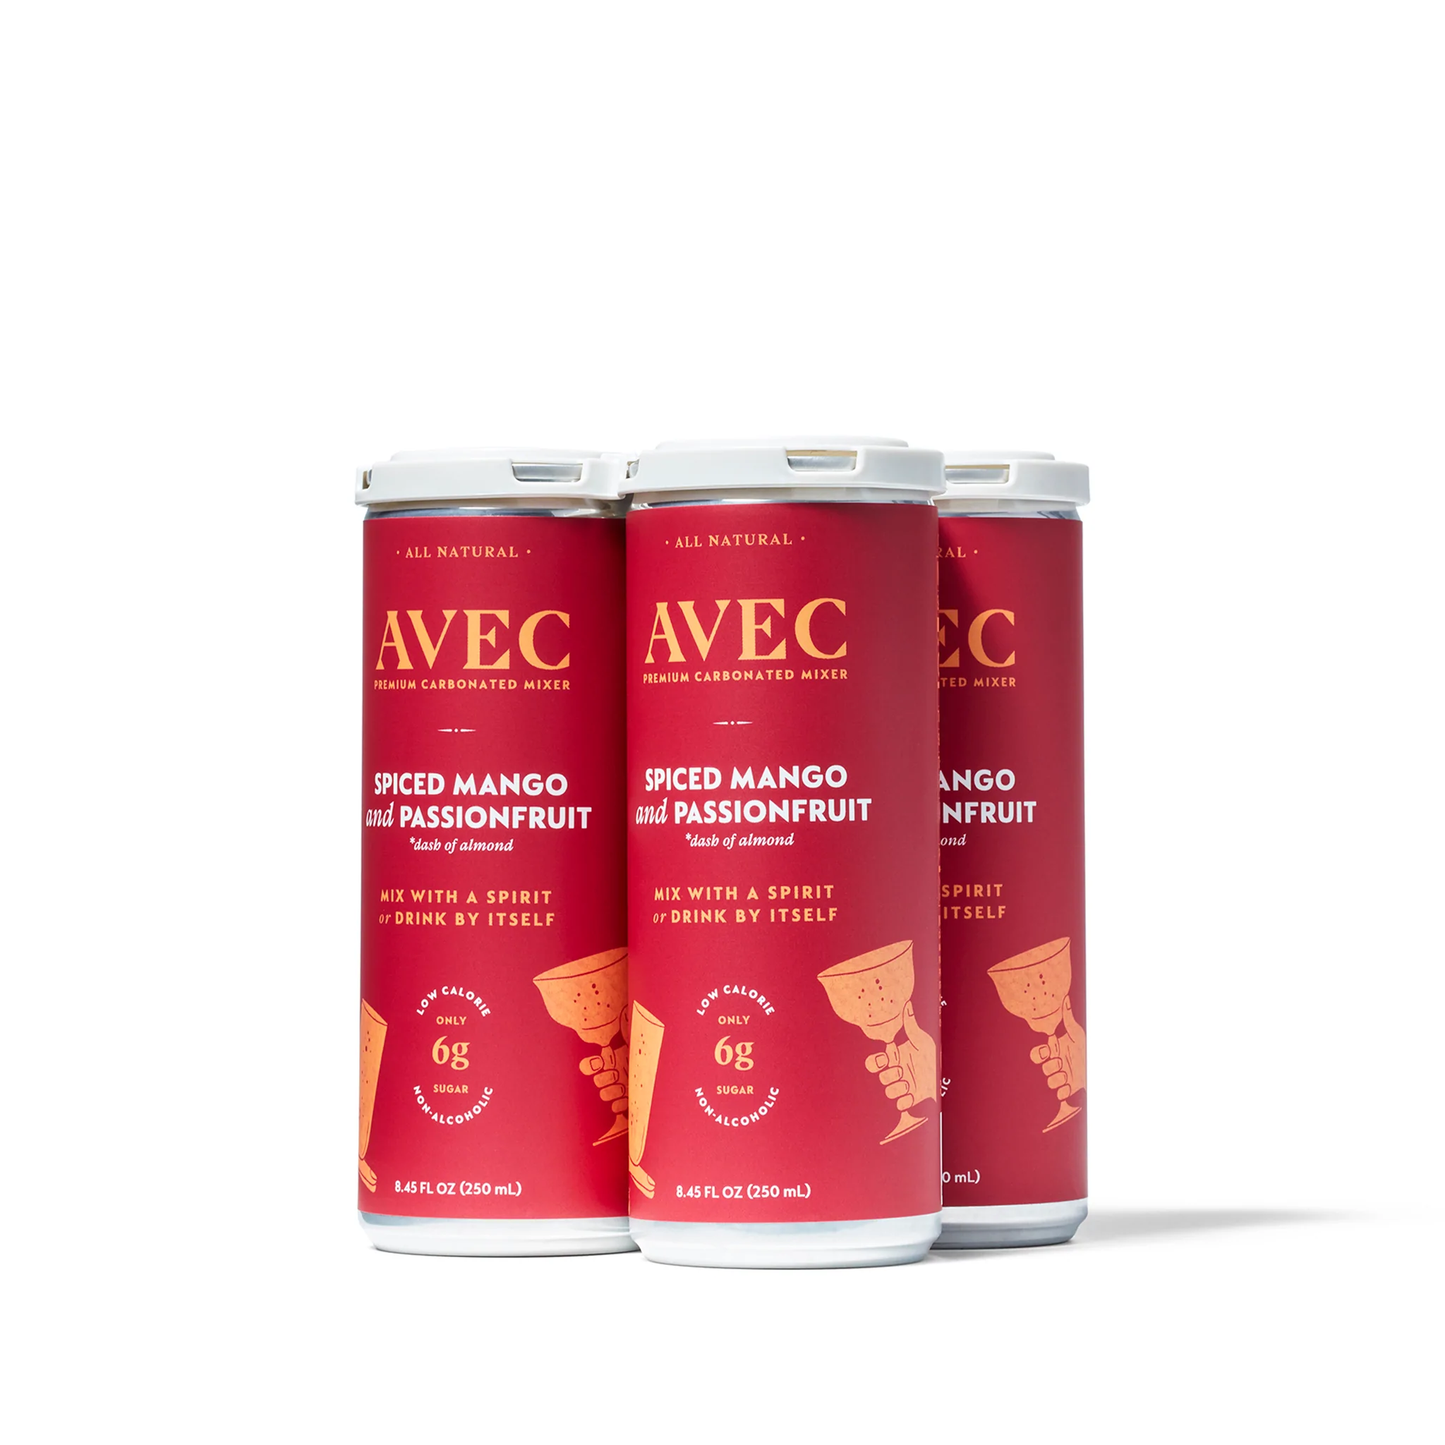 AVEC Spiced Mango and Passionfruit — Natural Sparkling Drink (4-Pack)